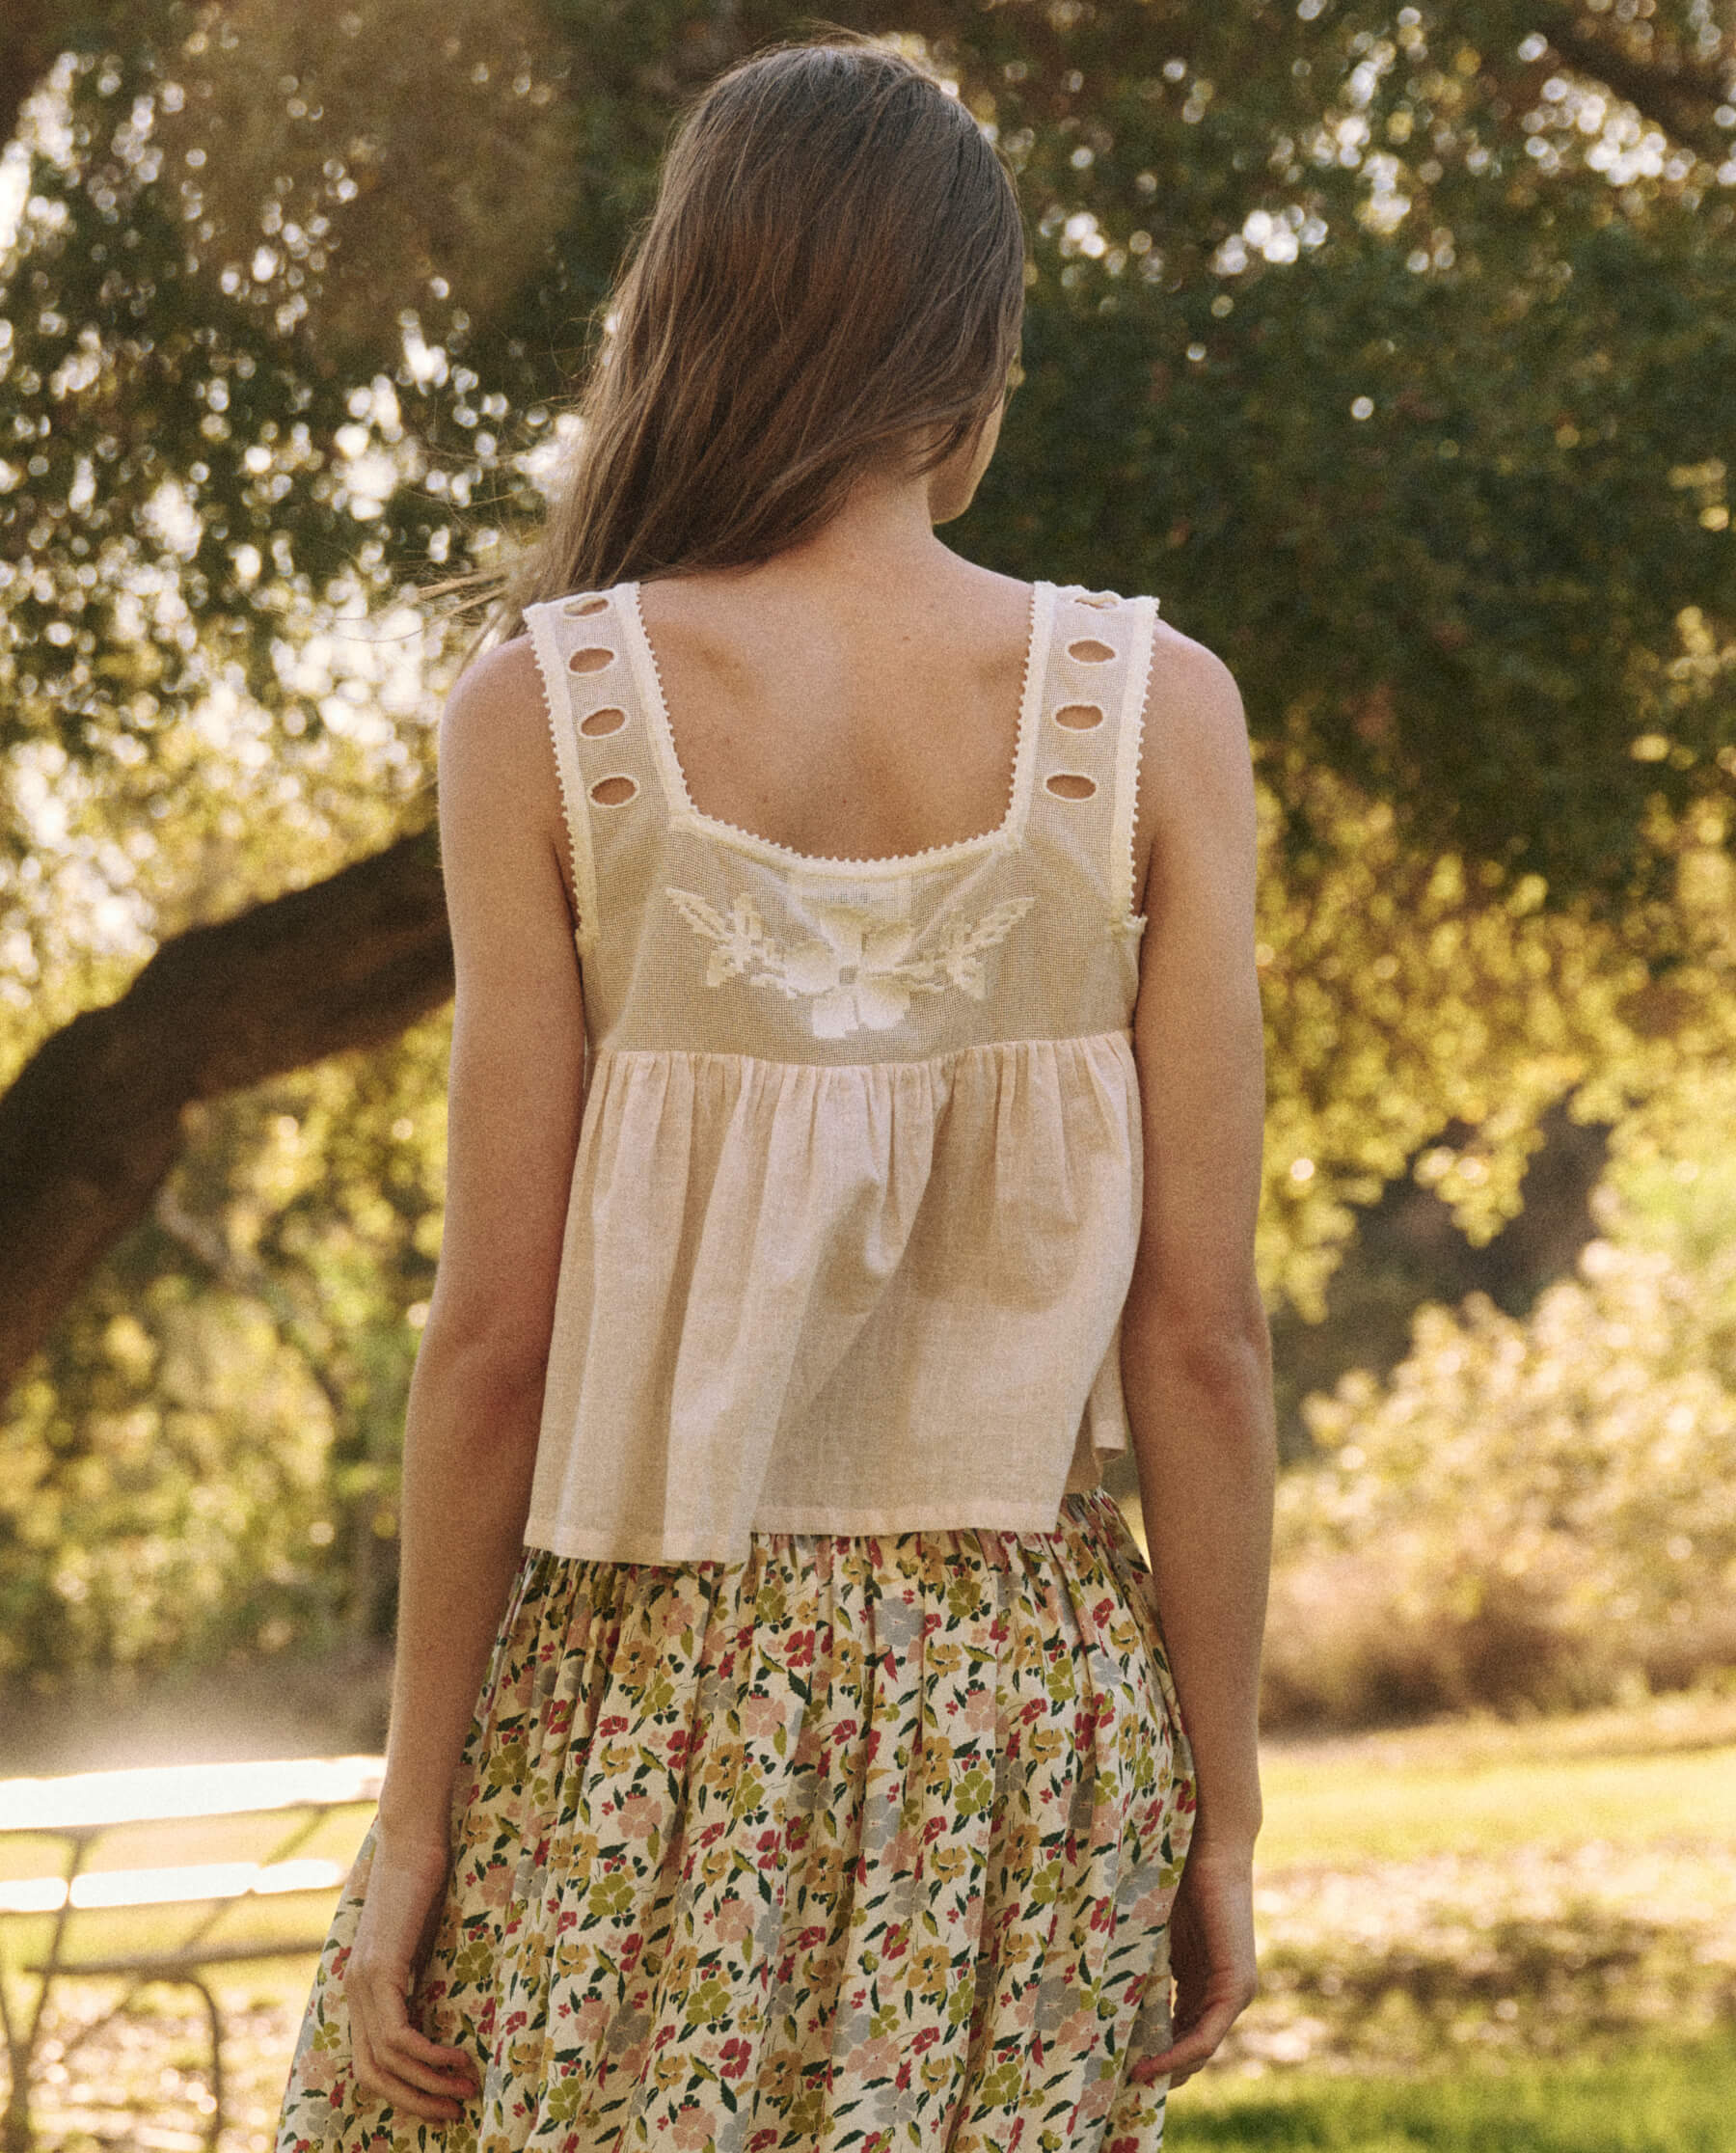 The Whimsy Top. -- Cream and Peach